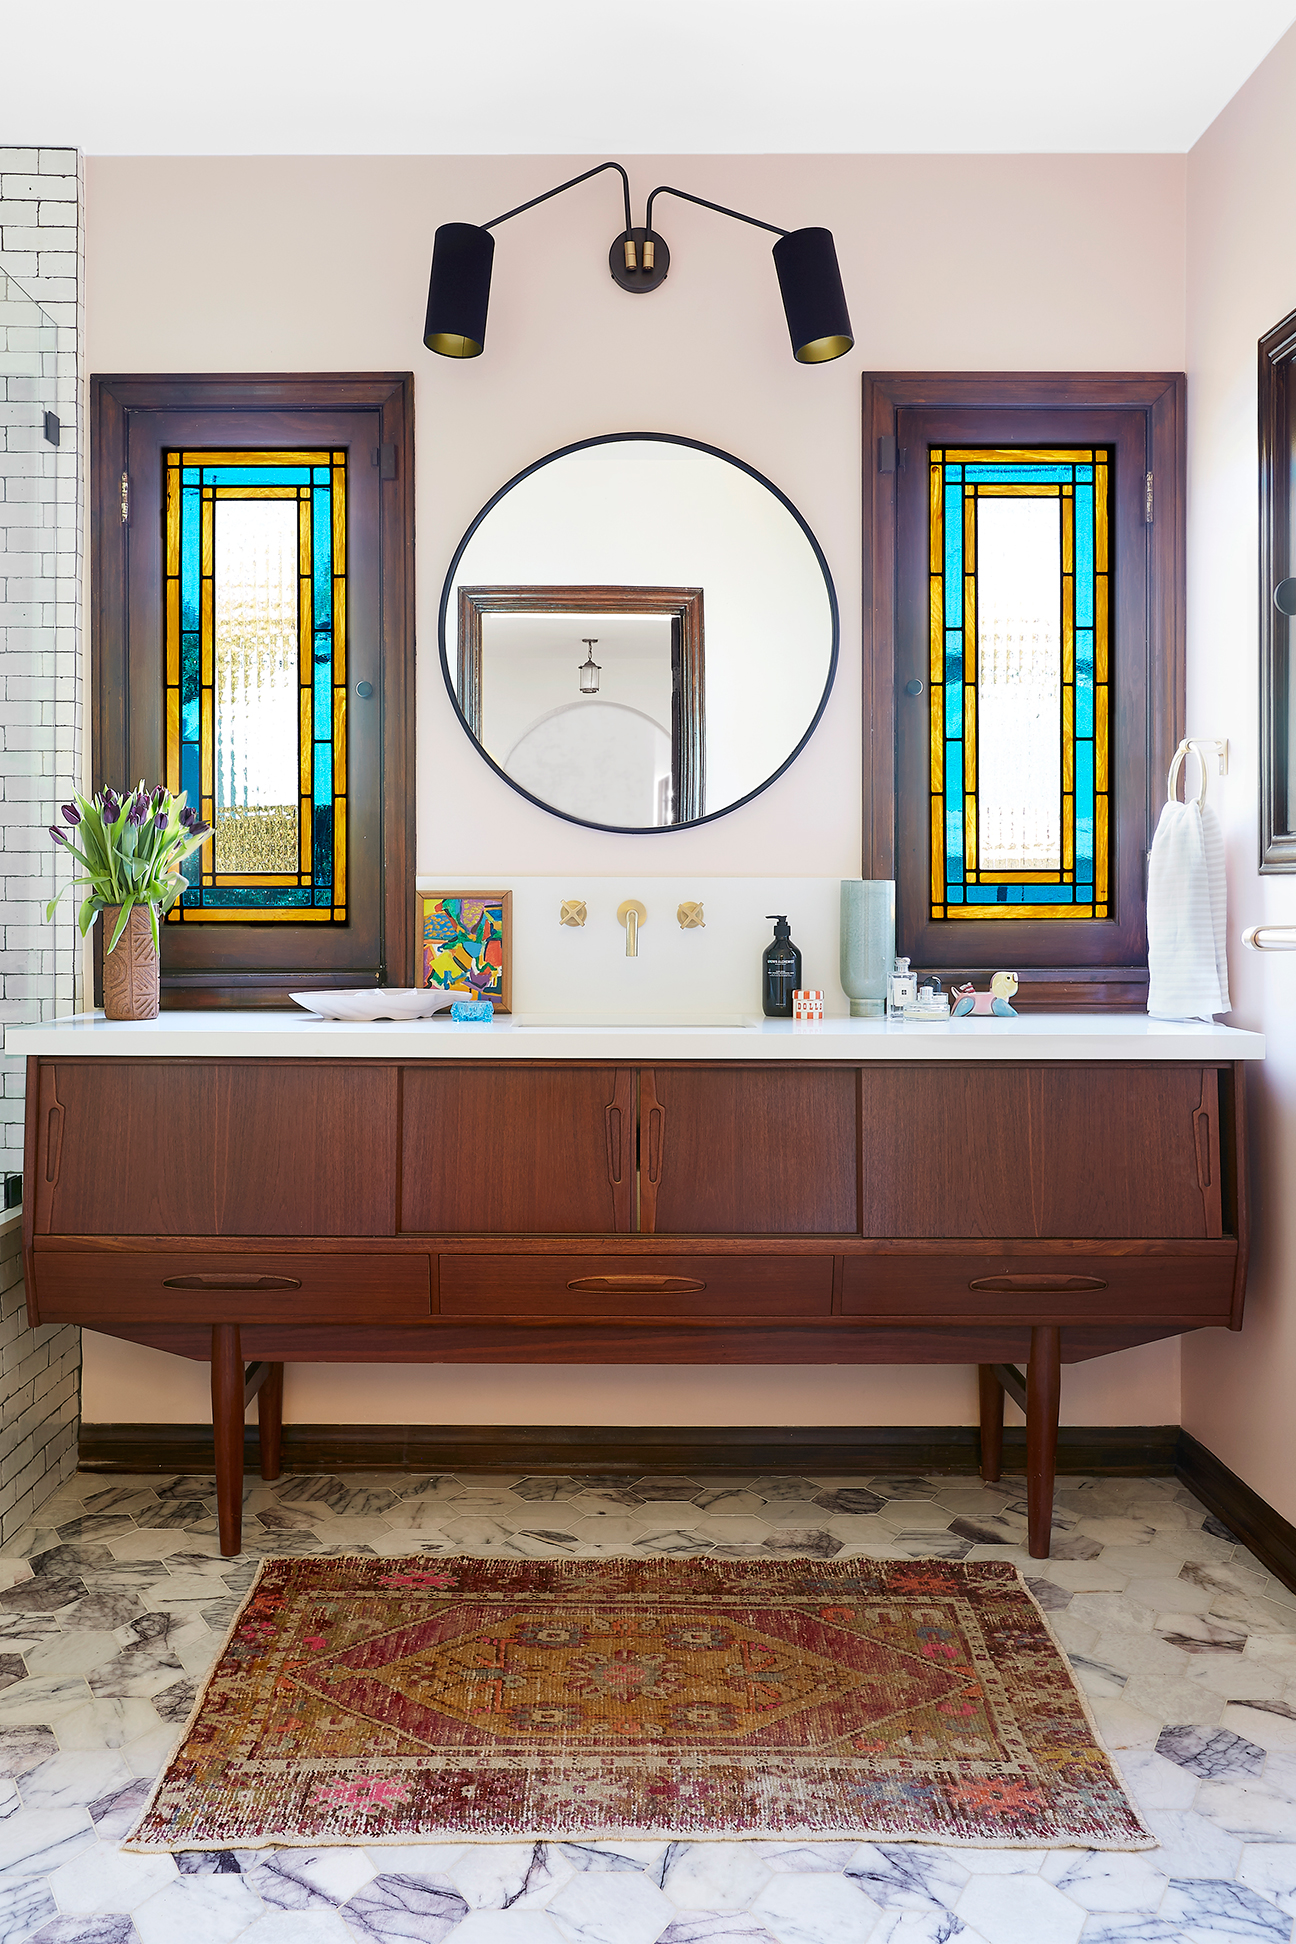 Bathroom Renovation Tips to Steal from This Couple’s Wildly Different ...